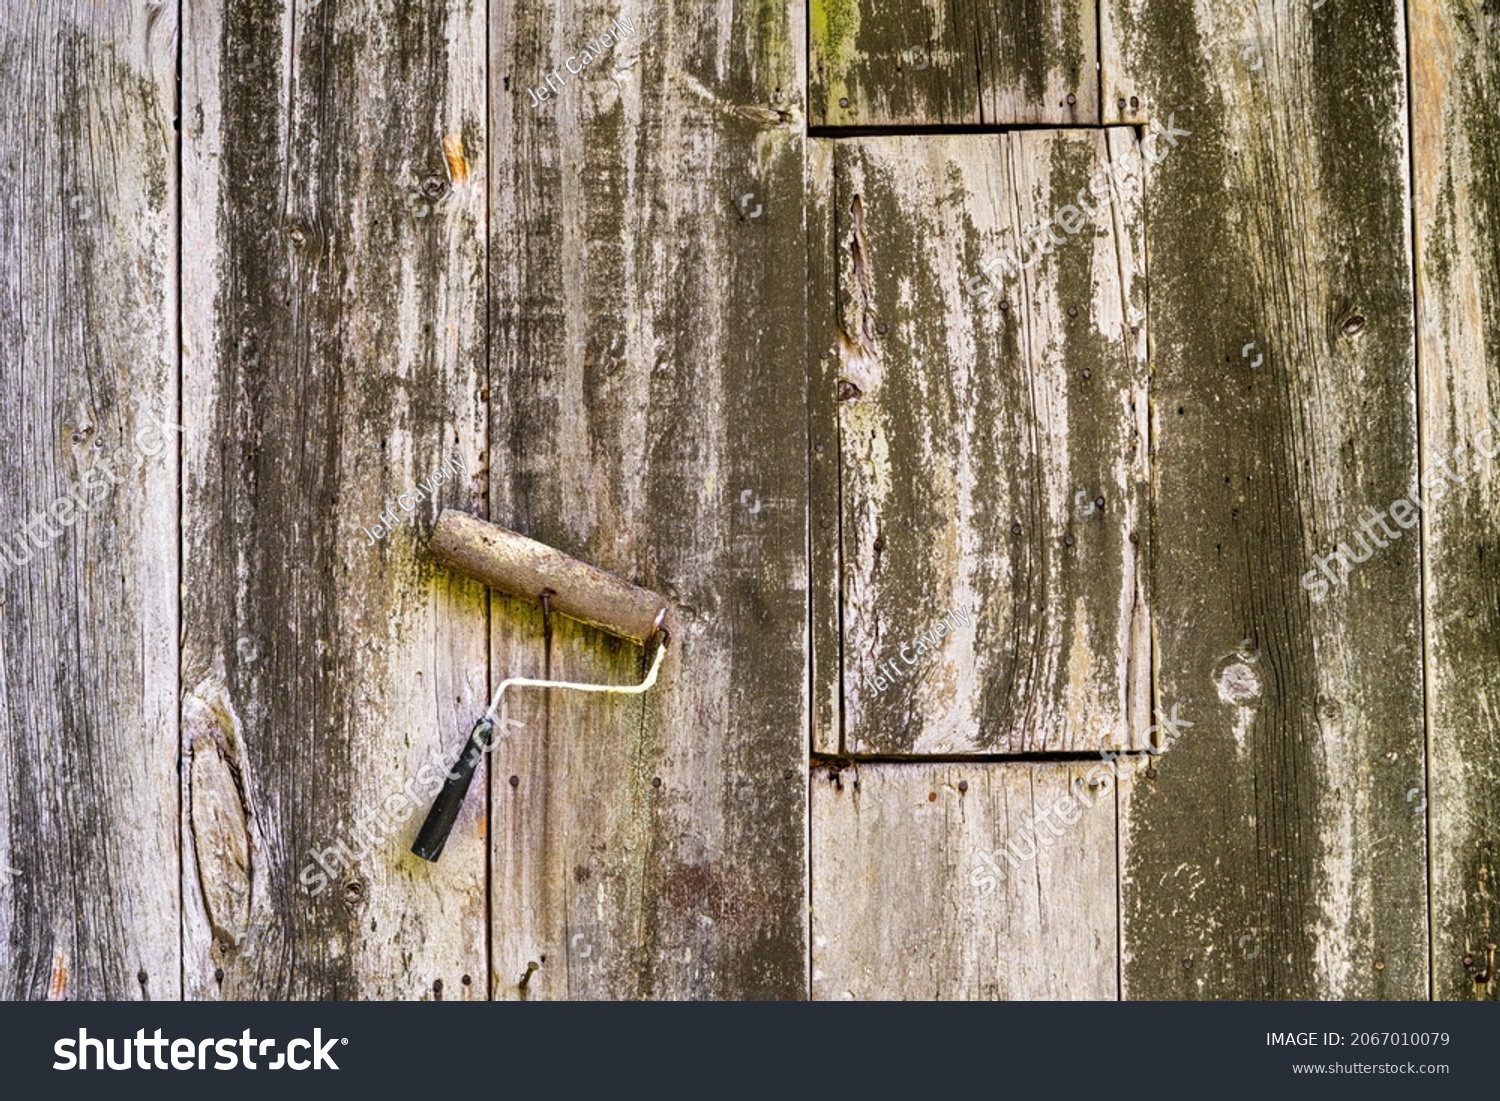 Closeup and abstract images of barns and outbuildings on a farm. #2067010079